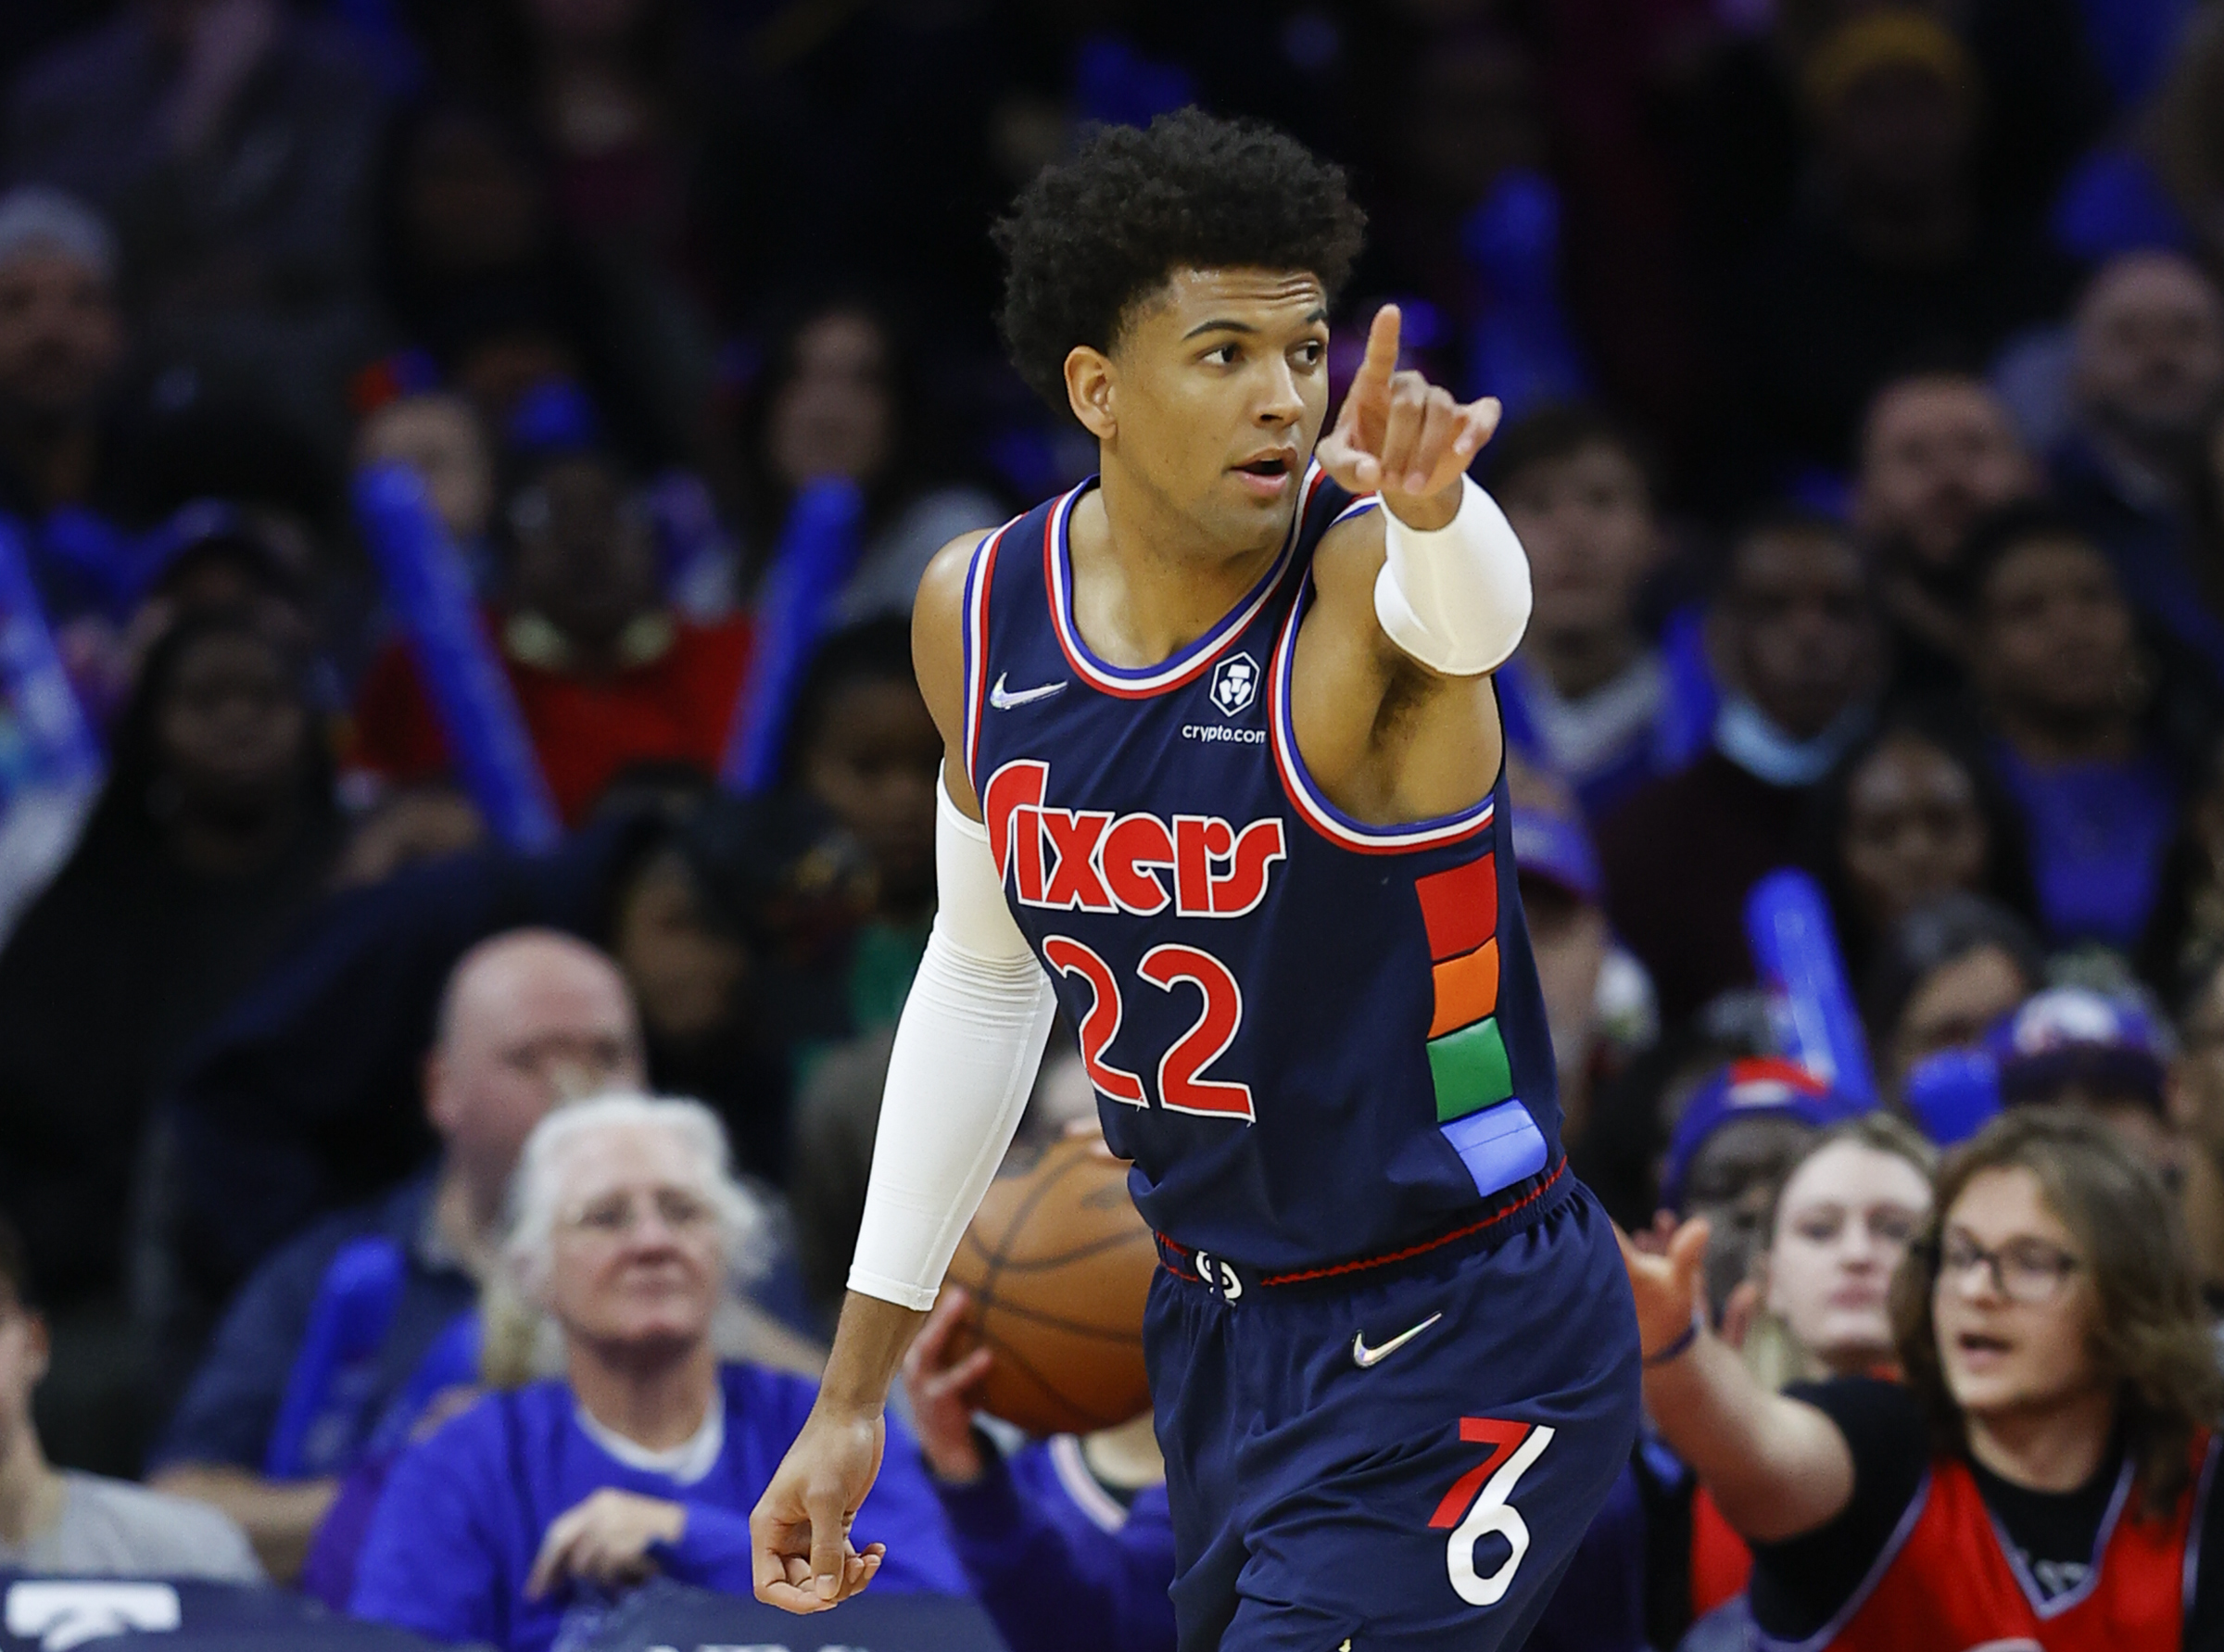 Getty Images - A close up view of the jersey of Matisse Thybulle #22 of the  Philadelphia 76ers during game against the Phoenix Suns at Visa Athletic  Center at ESPN Wide World